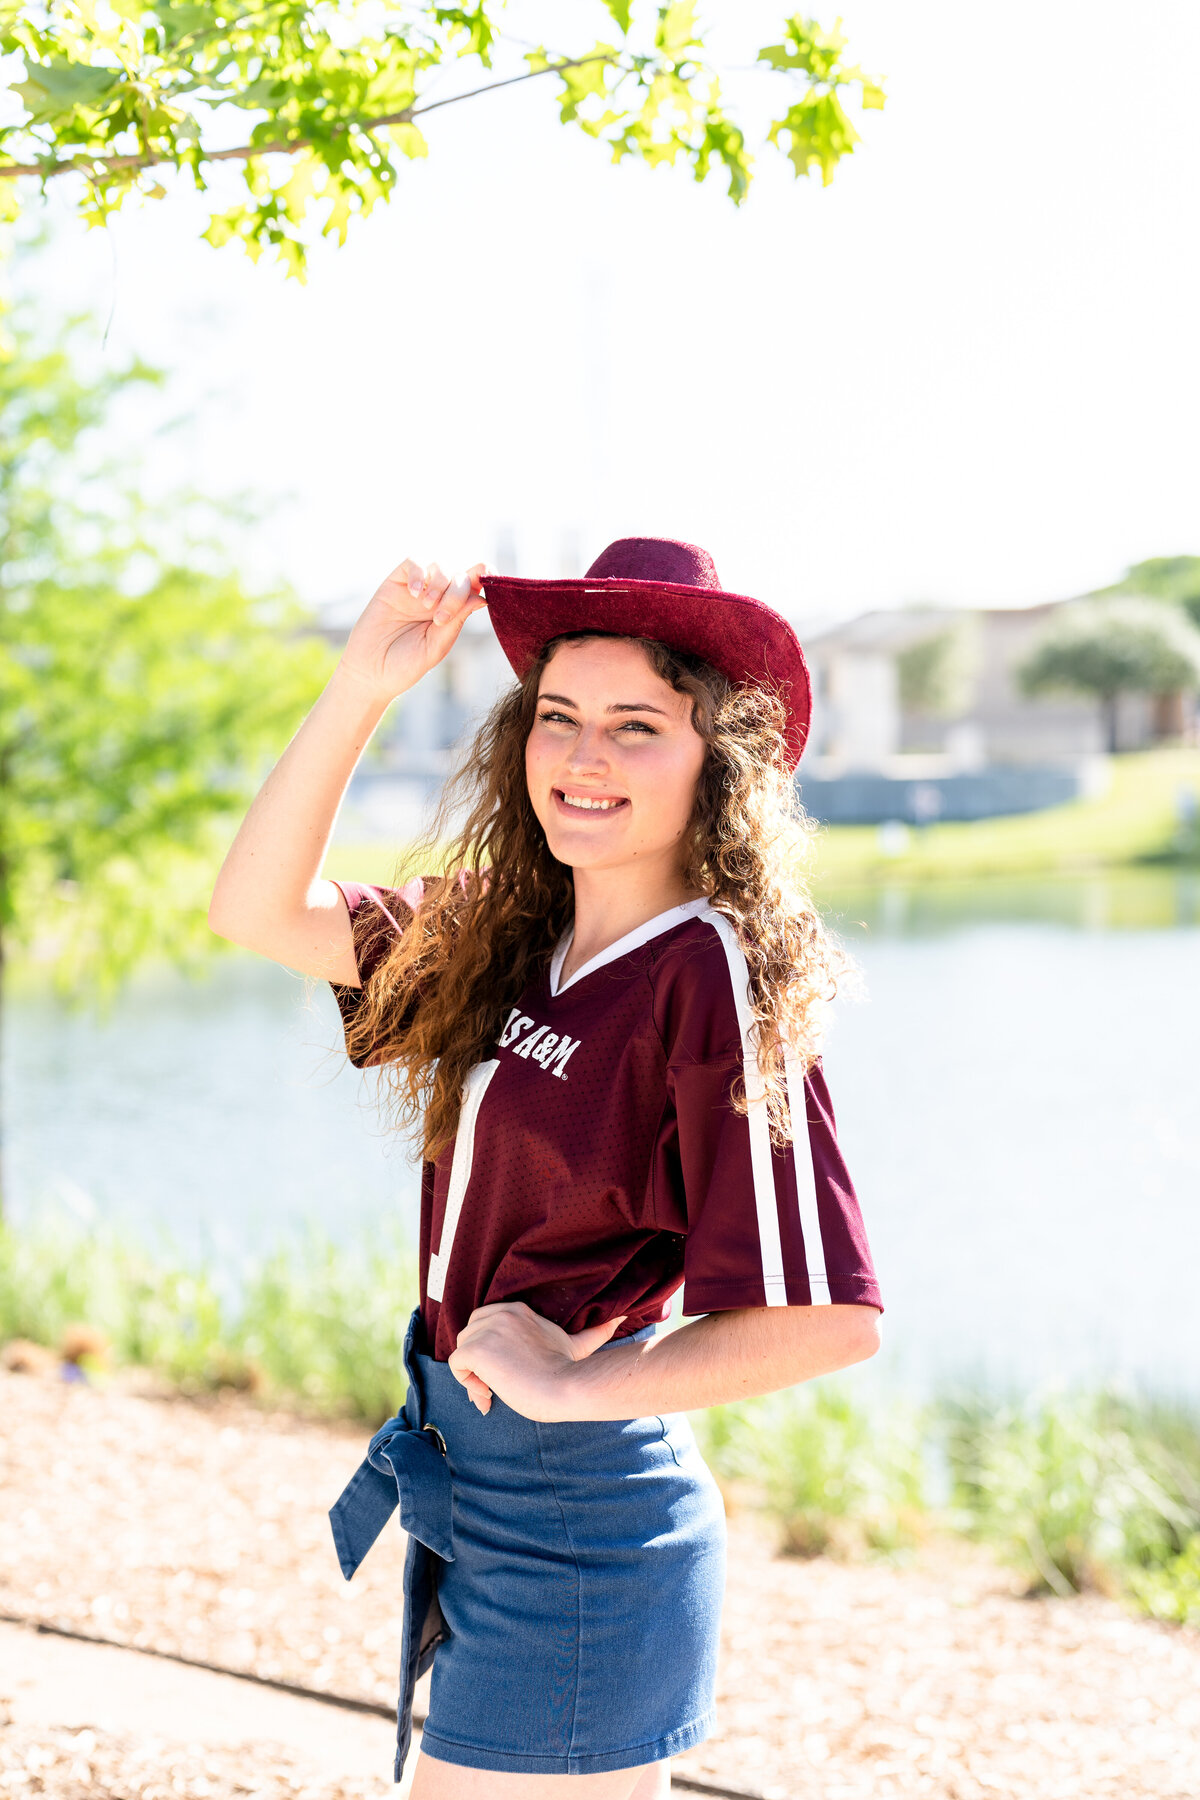 Texas A&M senior girl with hand on hip and maroon cowboy hat smiling while wearing Aggie maroon jersey and jean skirt at Aggie Park